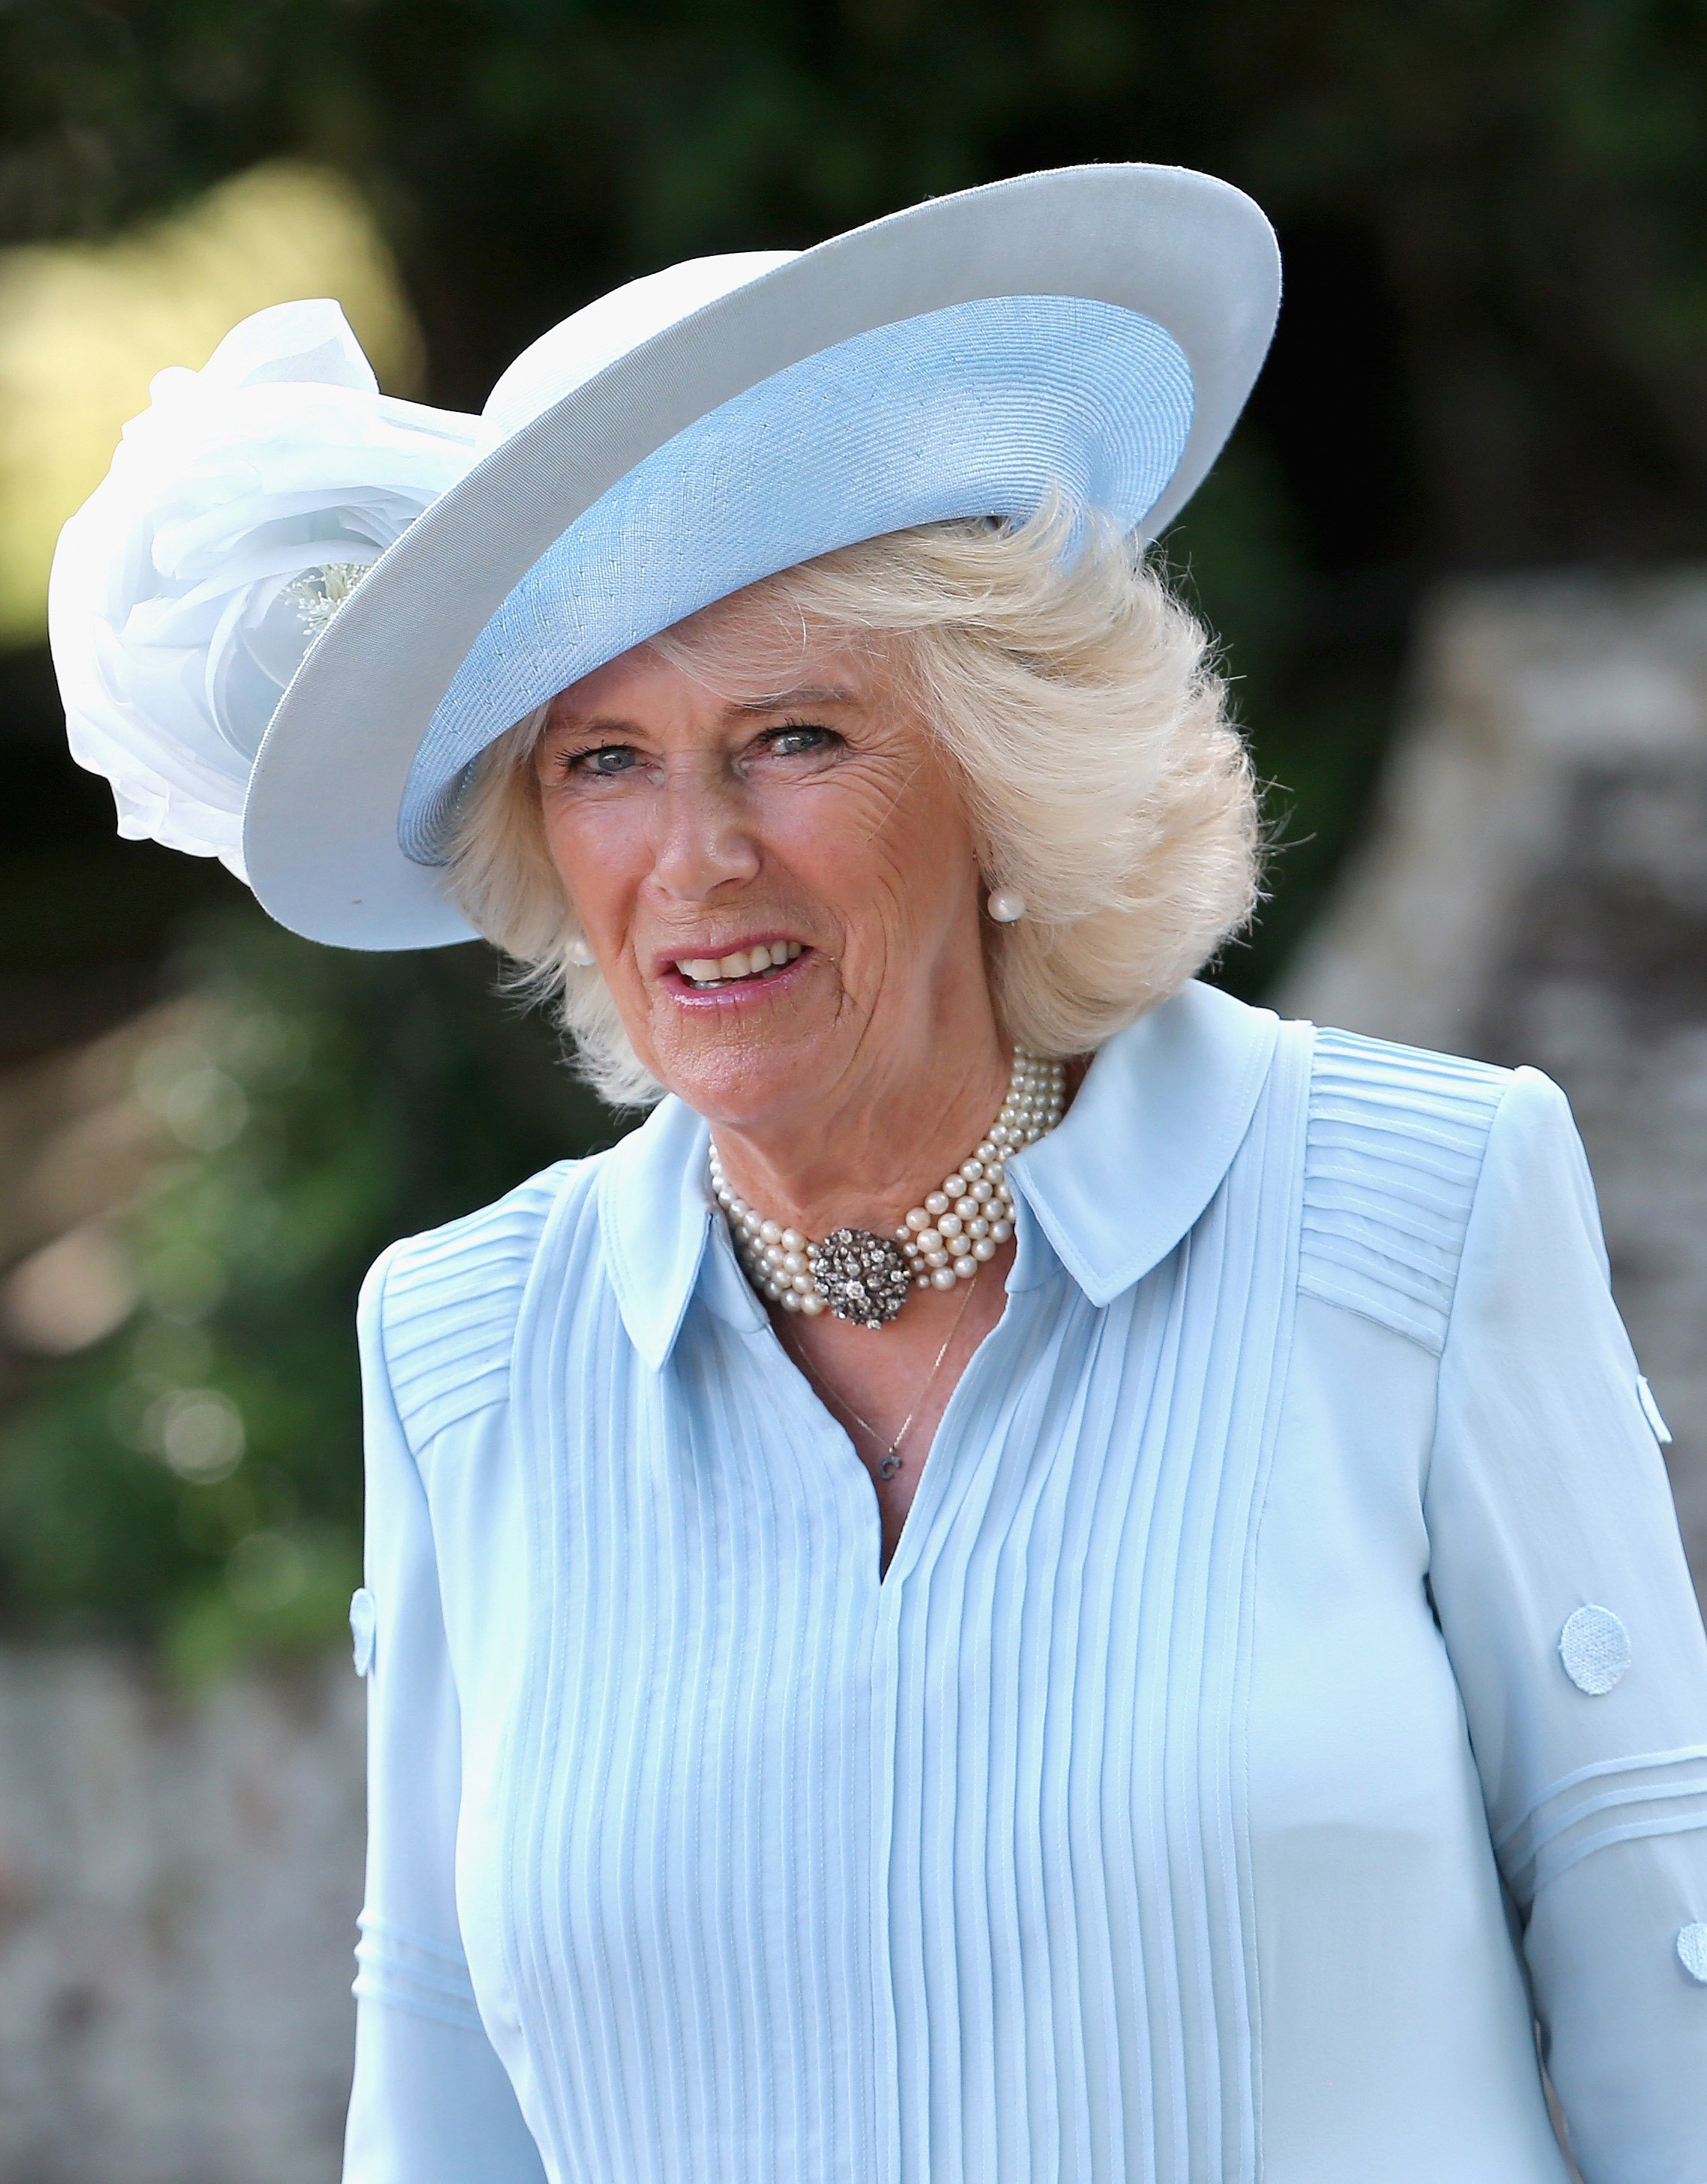 Camilla attended Princess Charlotte of Cambridge's Christening at St. Mary Magdalene Church in Sandringham, England, on July 5, 2015 | Source: Getty Images